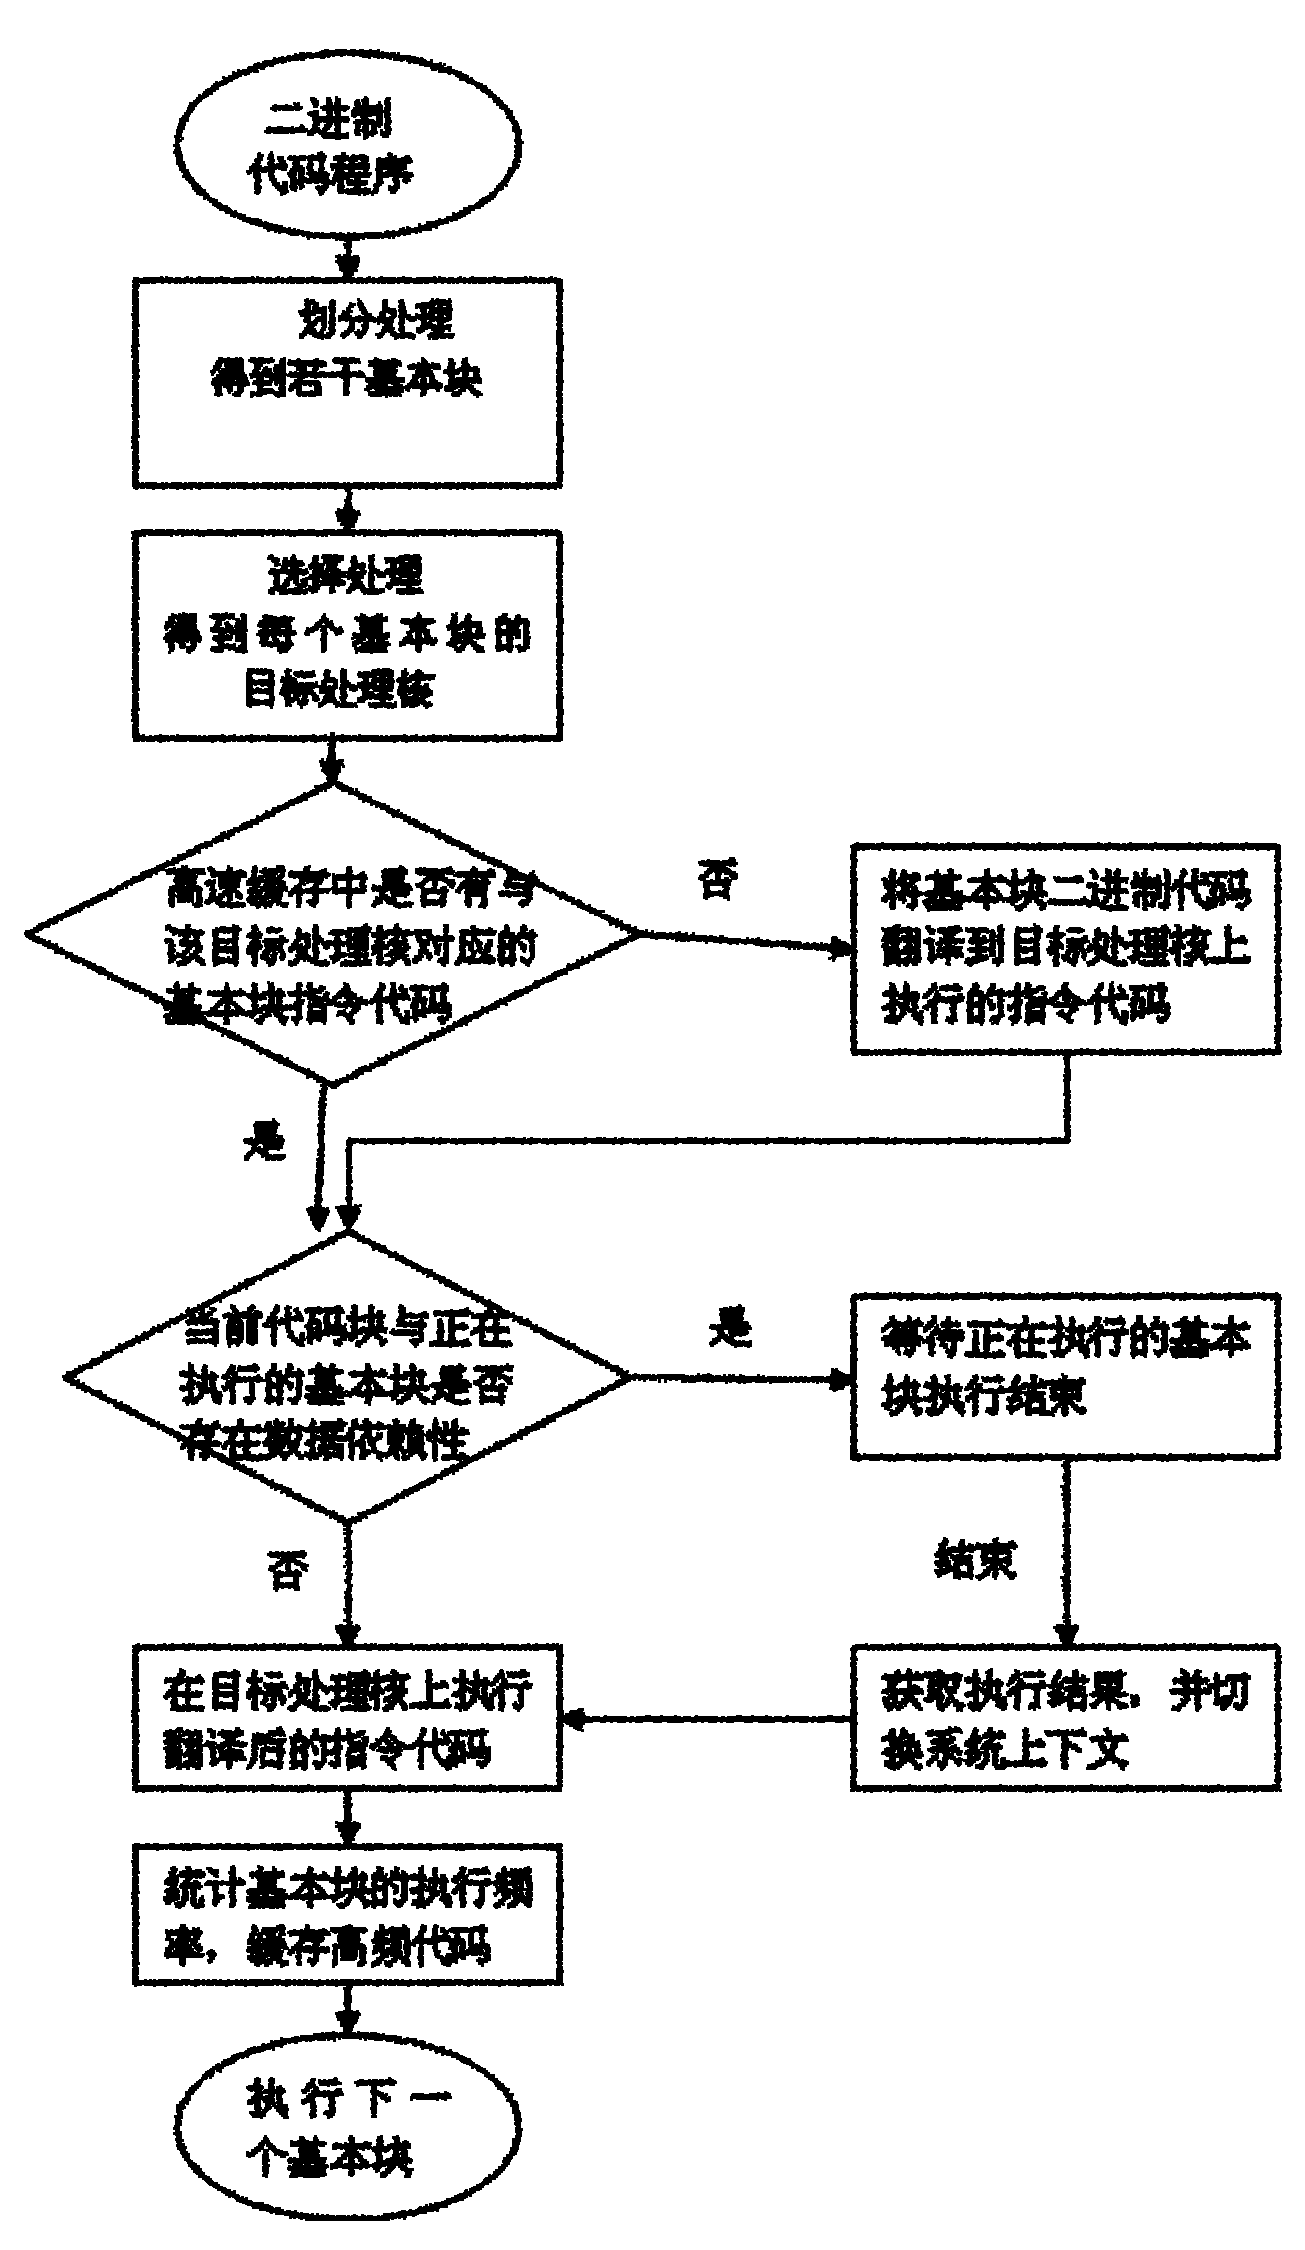 Method for executing dynamic allocation command on embedded heterogeneous multi-core